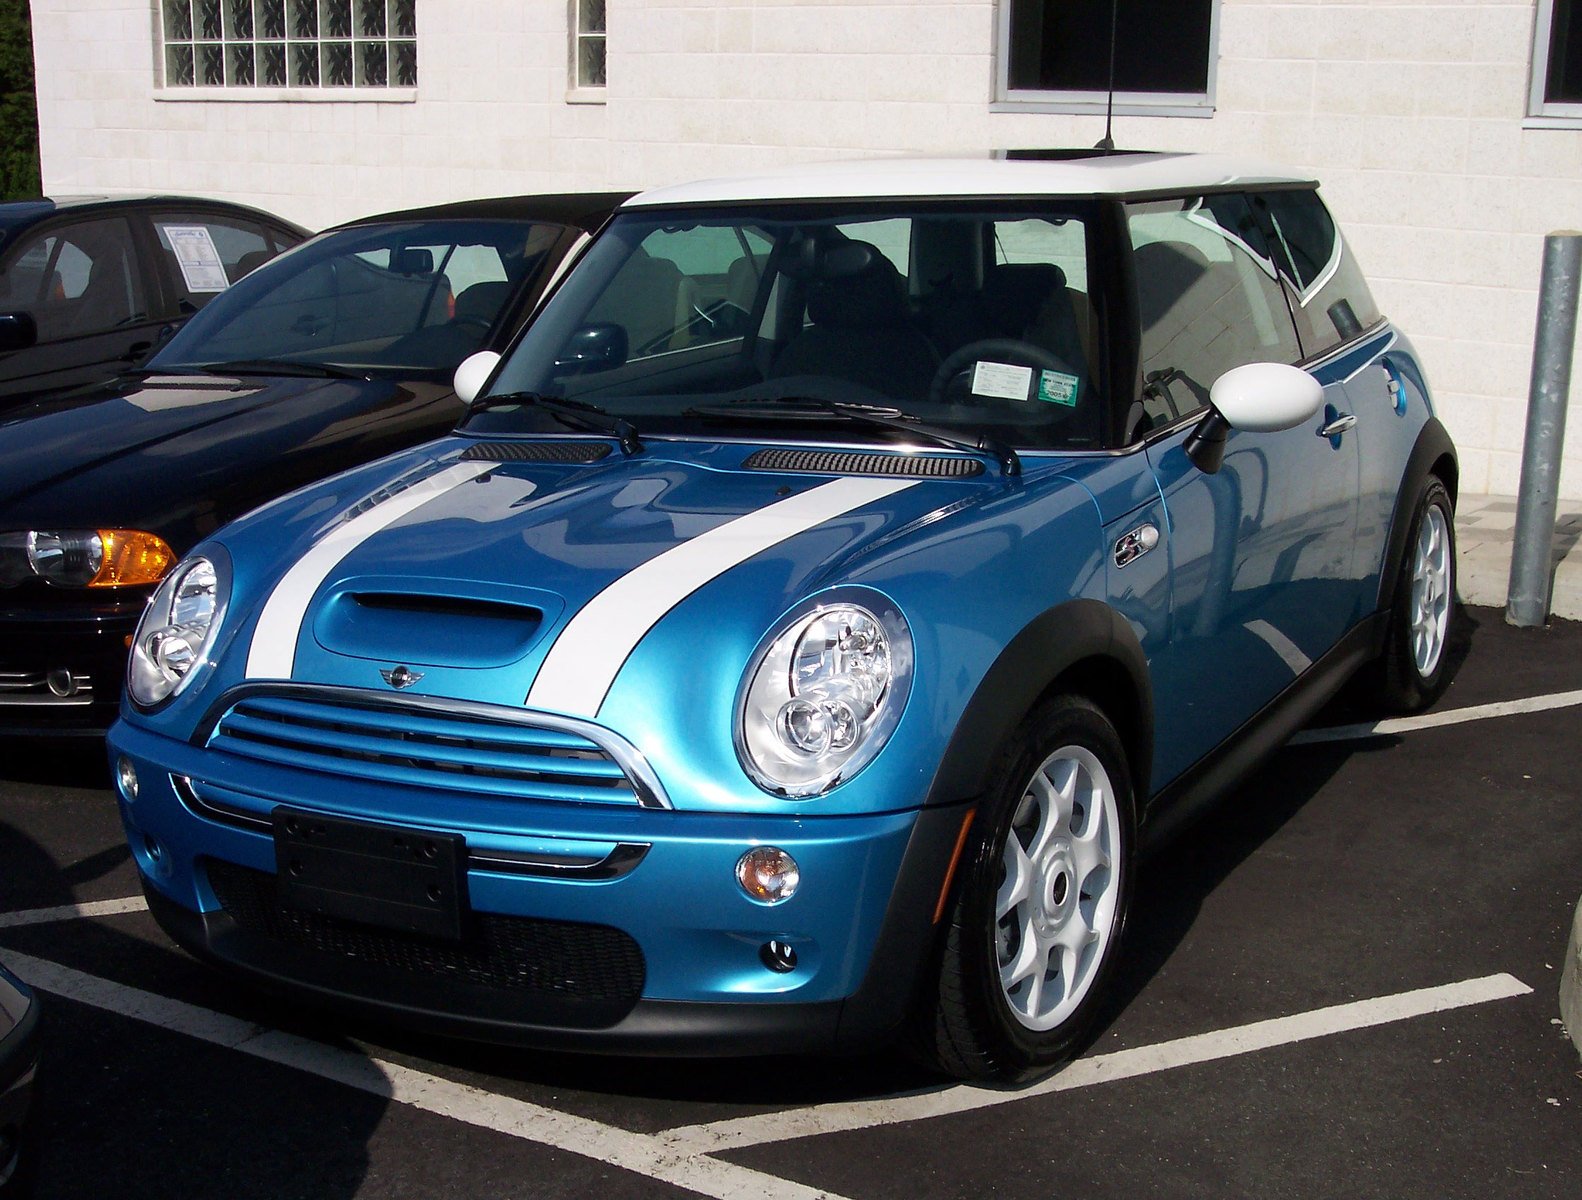 a blue and white striped mini with black doors and headlights